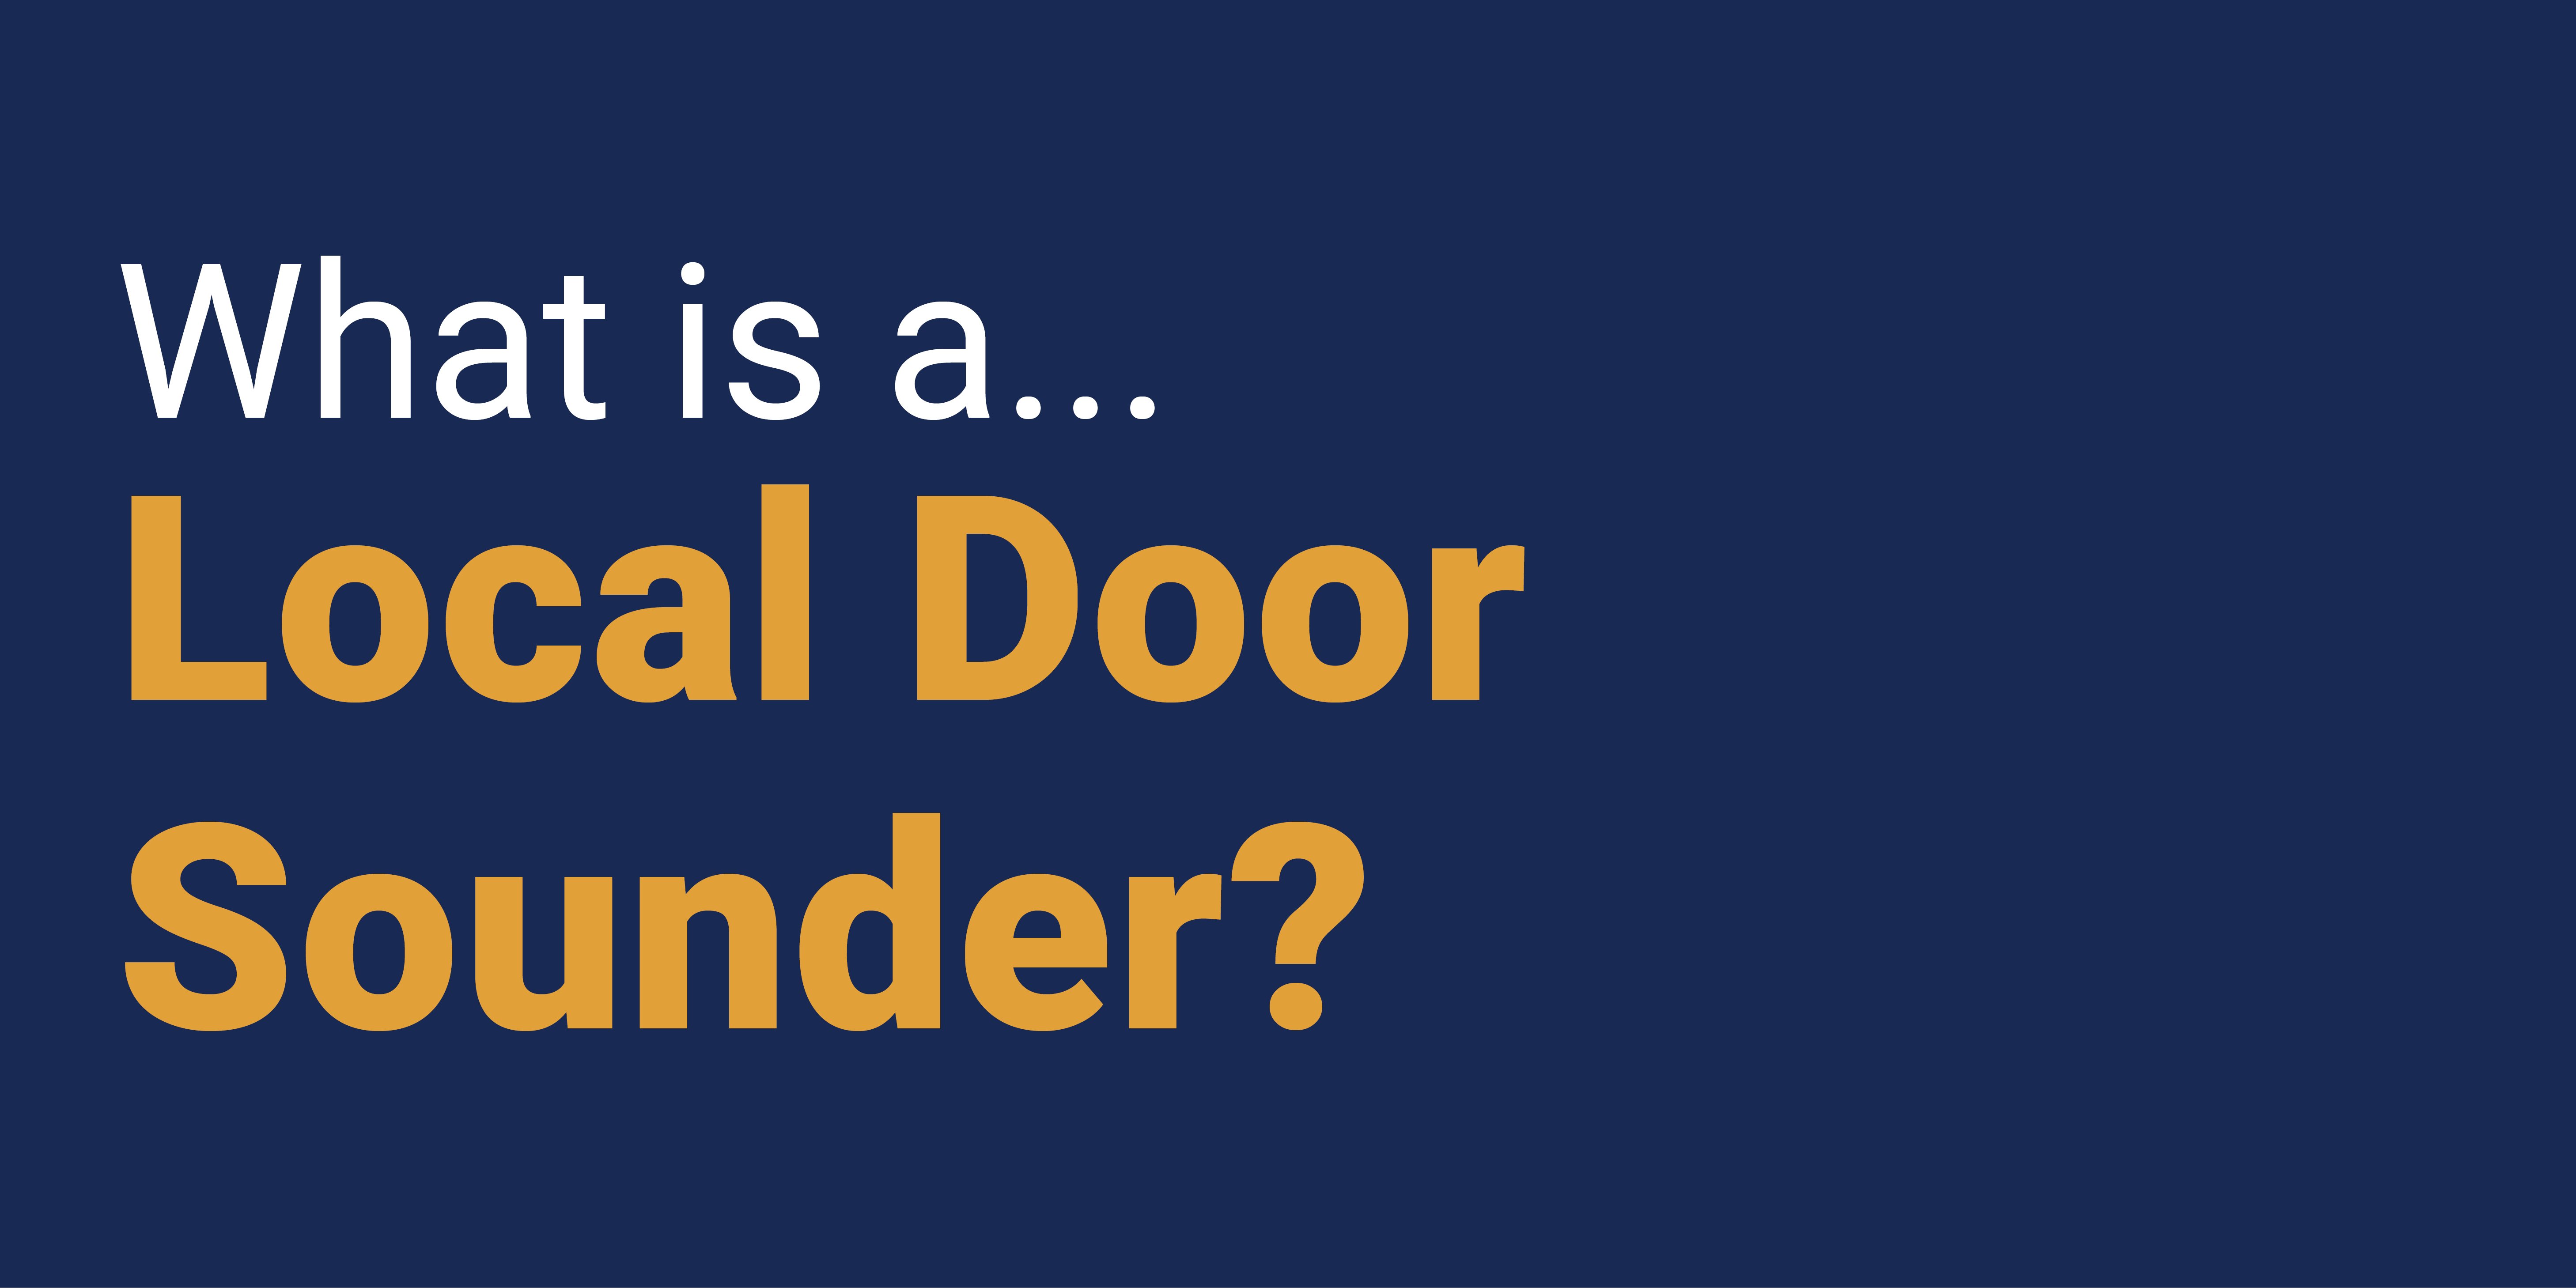 What is a Local Door Sounder?